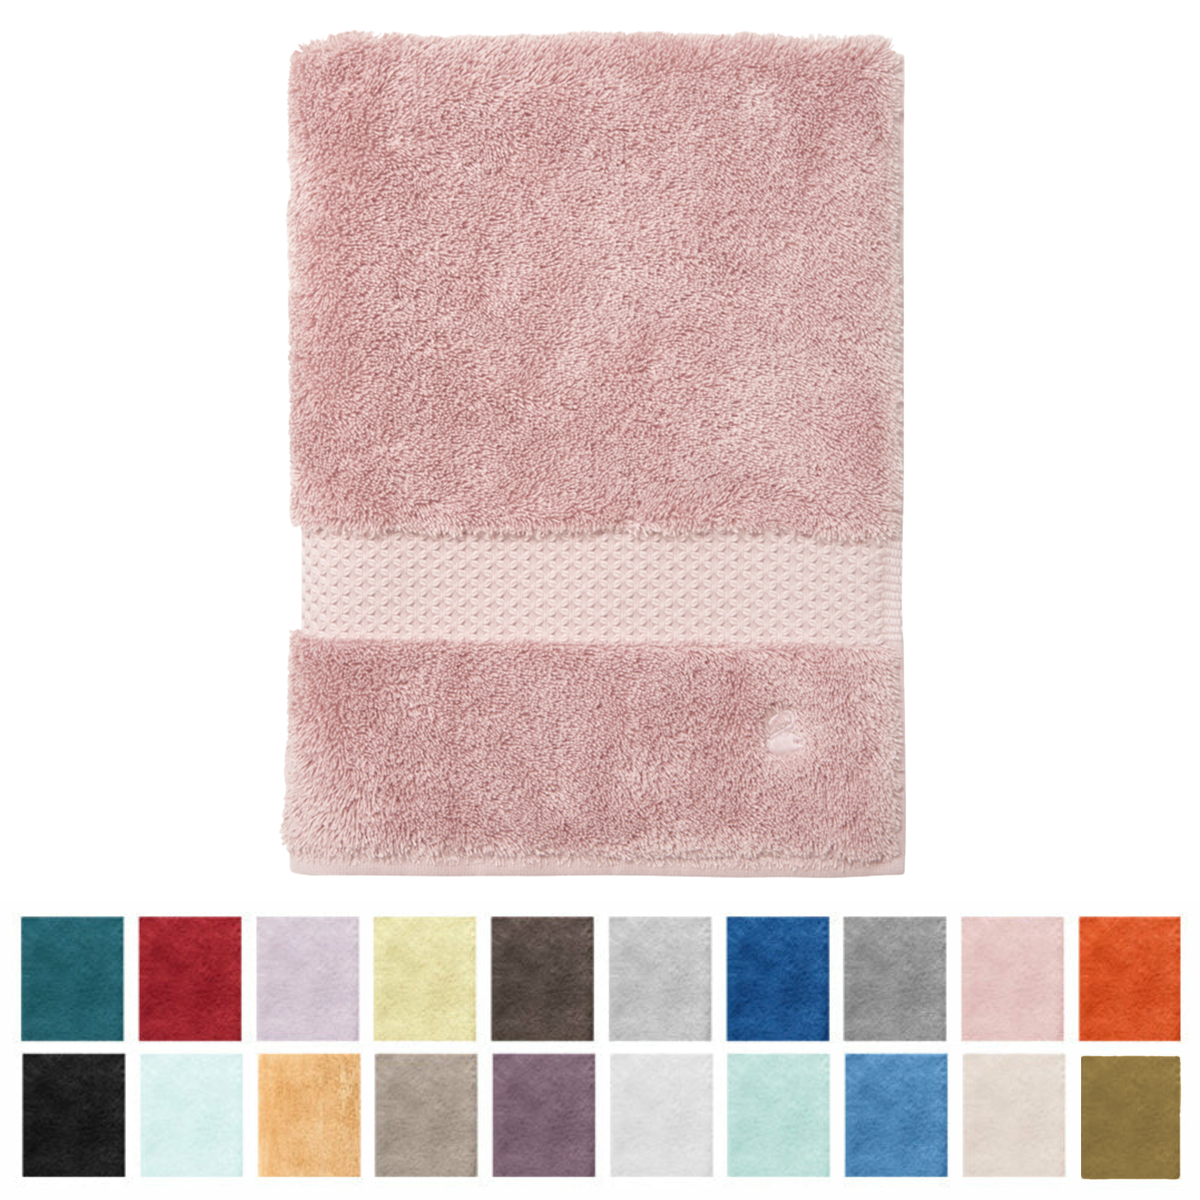 Color Swatch Samples Yves Delorme Etoile Bath Collection